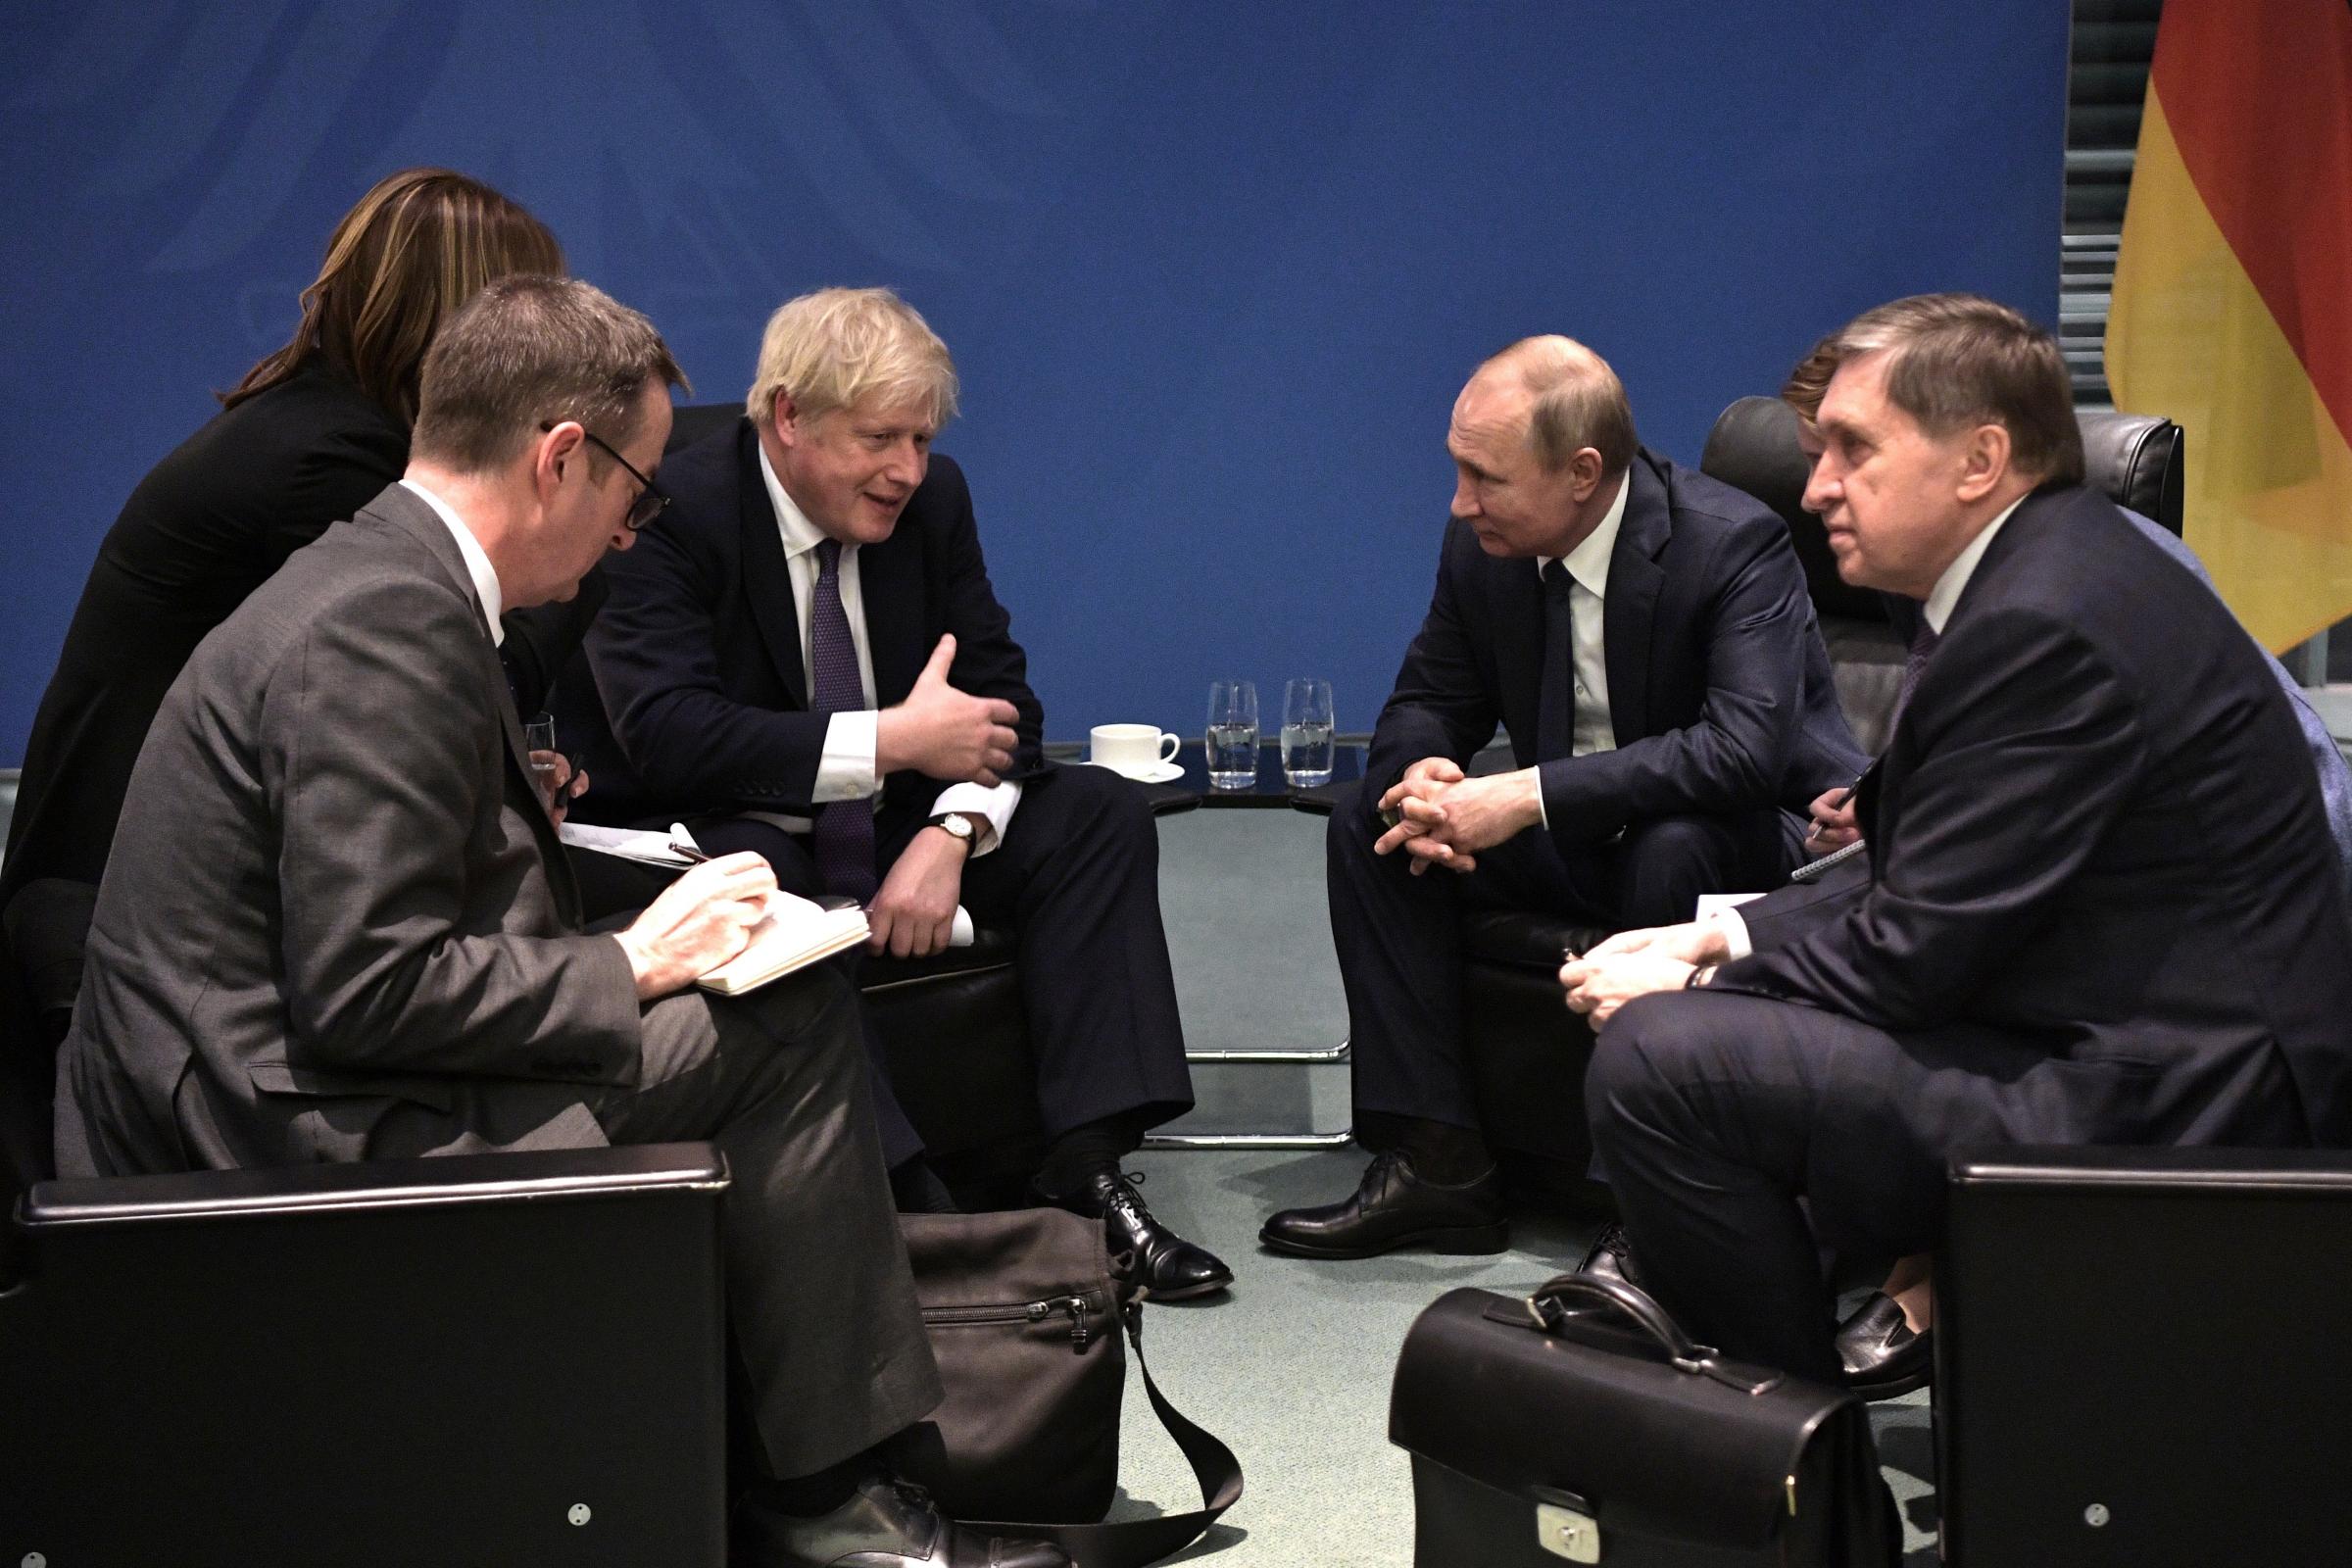 Salisbury Journal: Prime Minister Boris Johnson and Russian President Vladimir Putin talk to each other during their meeting on the sideline of a conference on Libya in Berlin